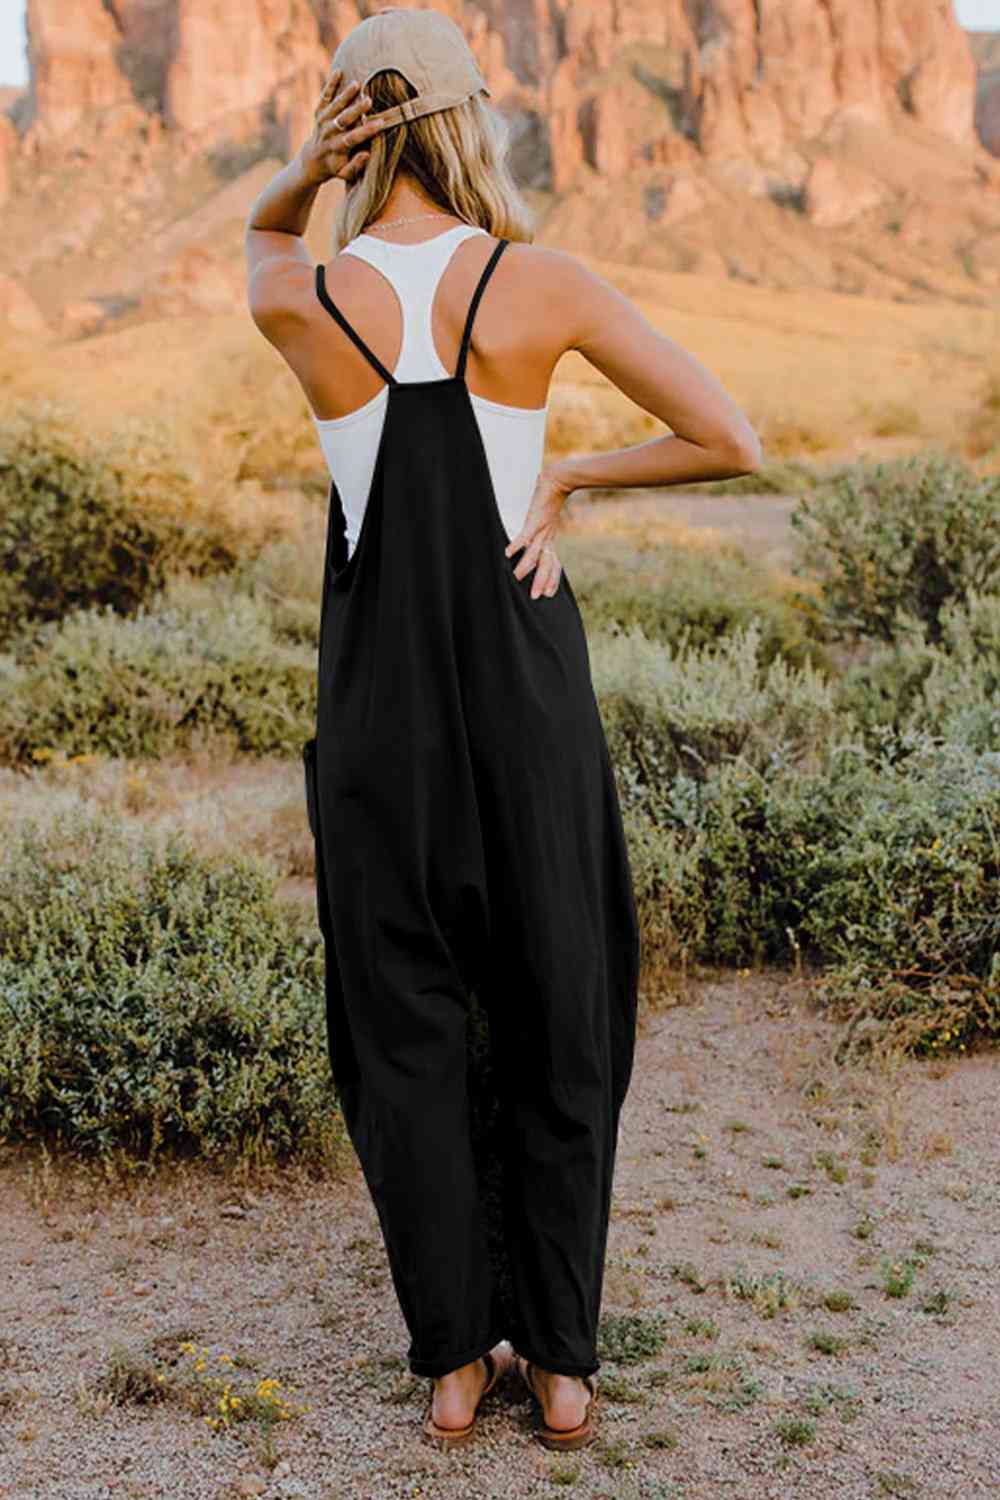 Double Take V-Neck Sleeveless Jumpsuit with Pockets for a Chic yet Casual Look